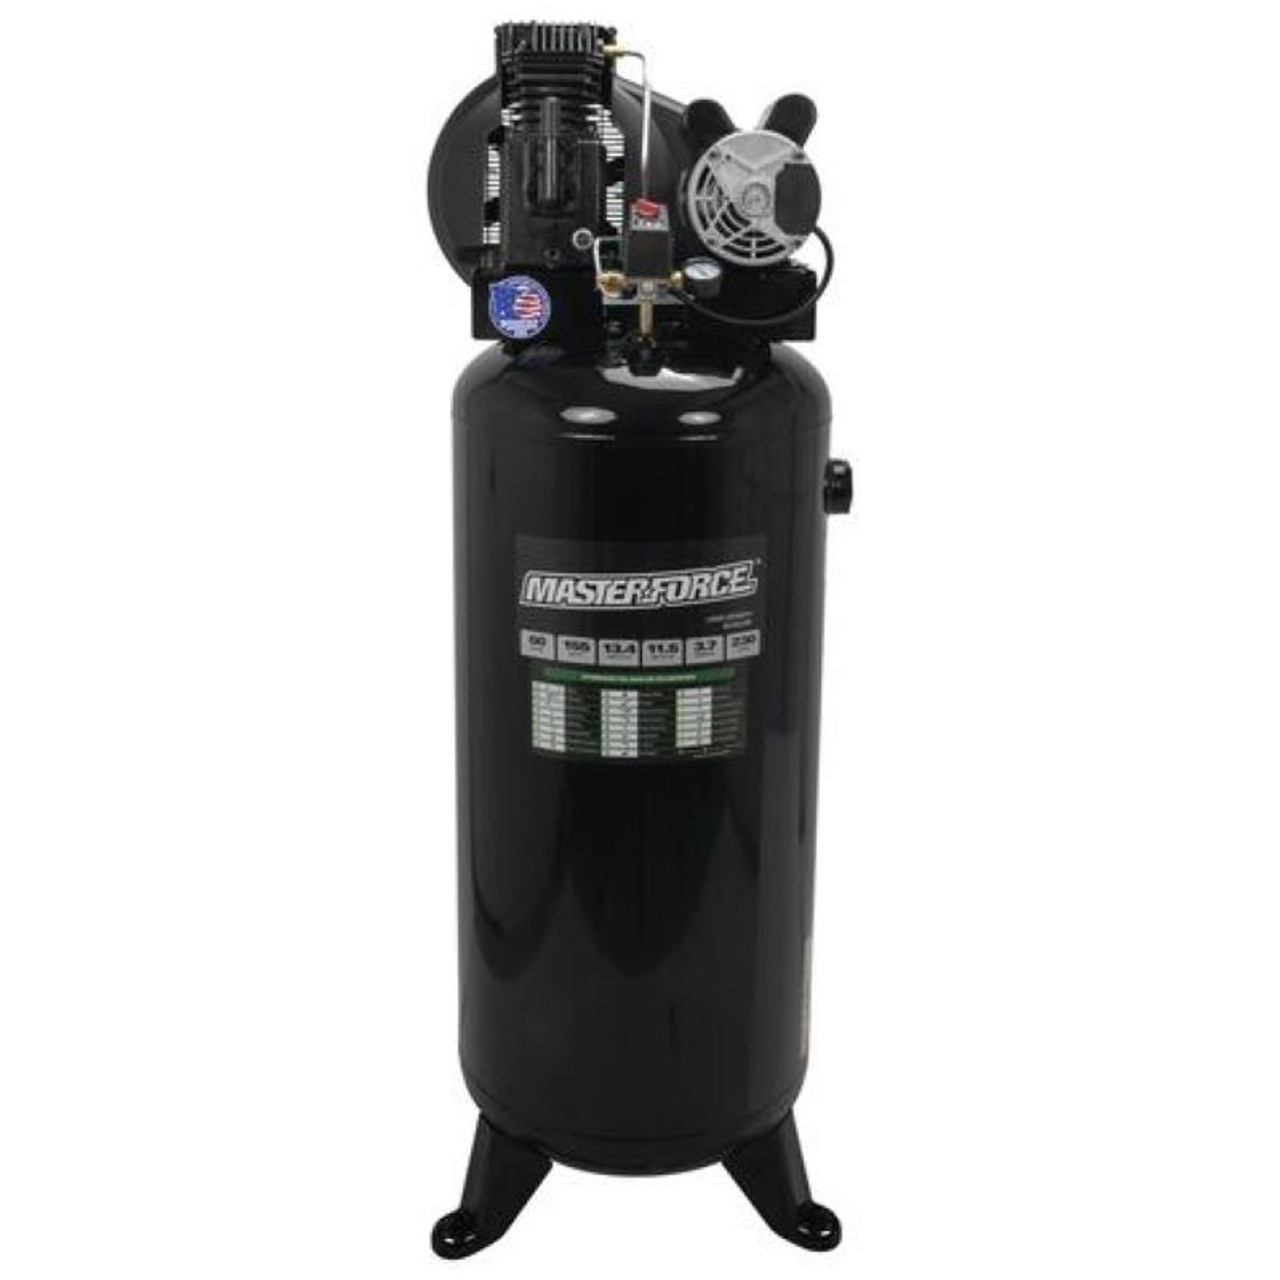 Masterforce 60 Gallon Stationary 155 PSI Air Compressor